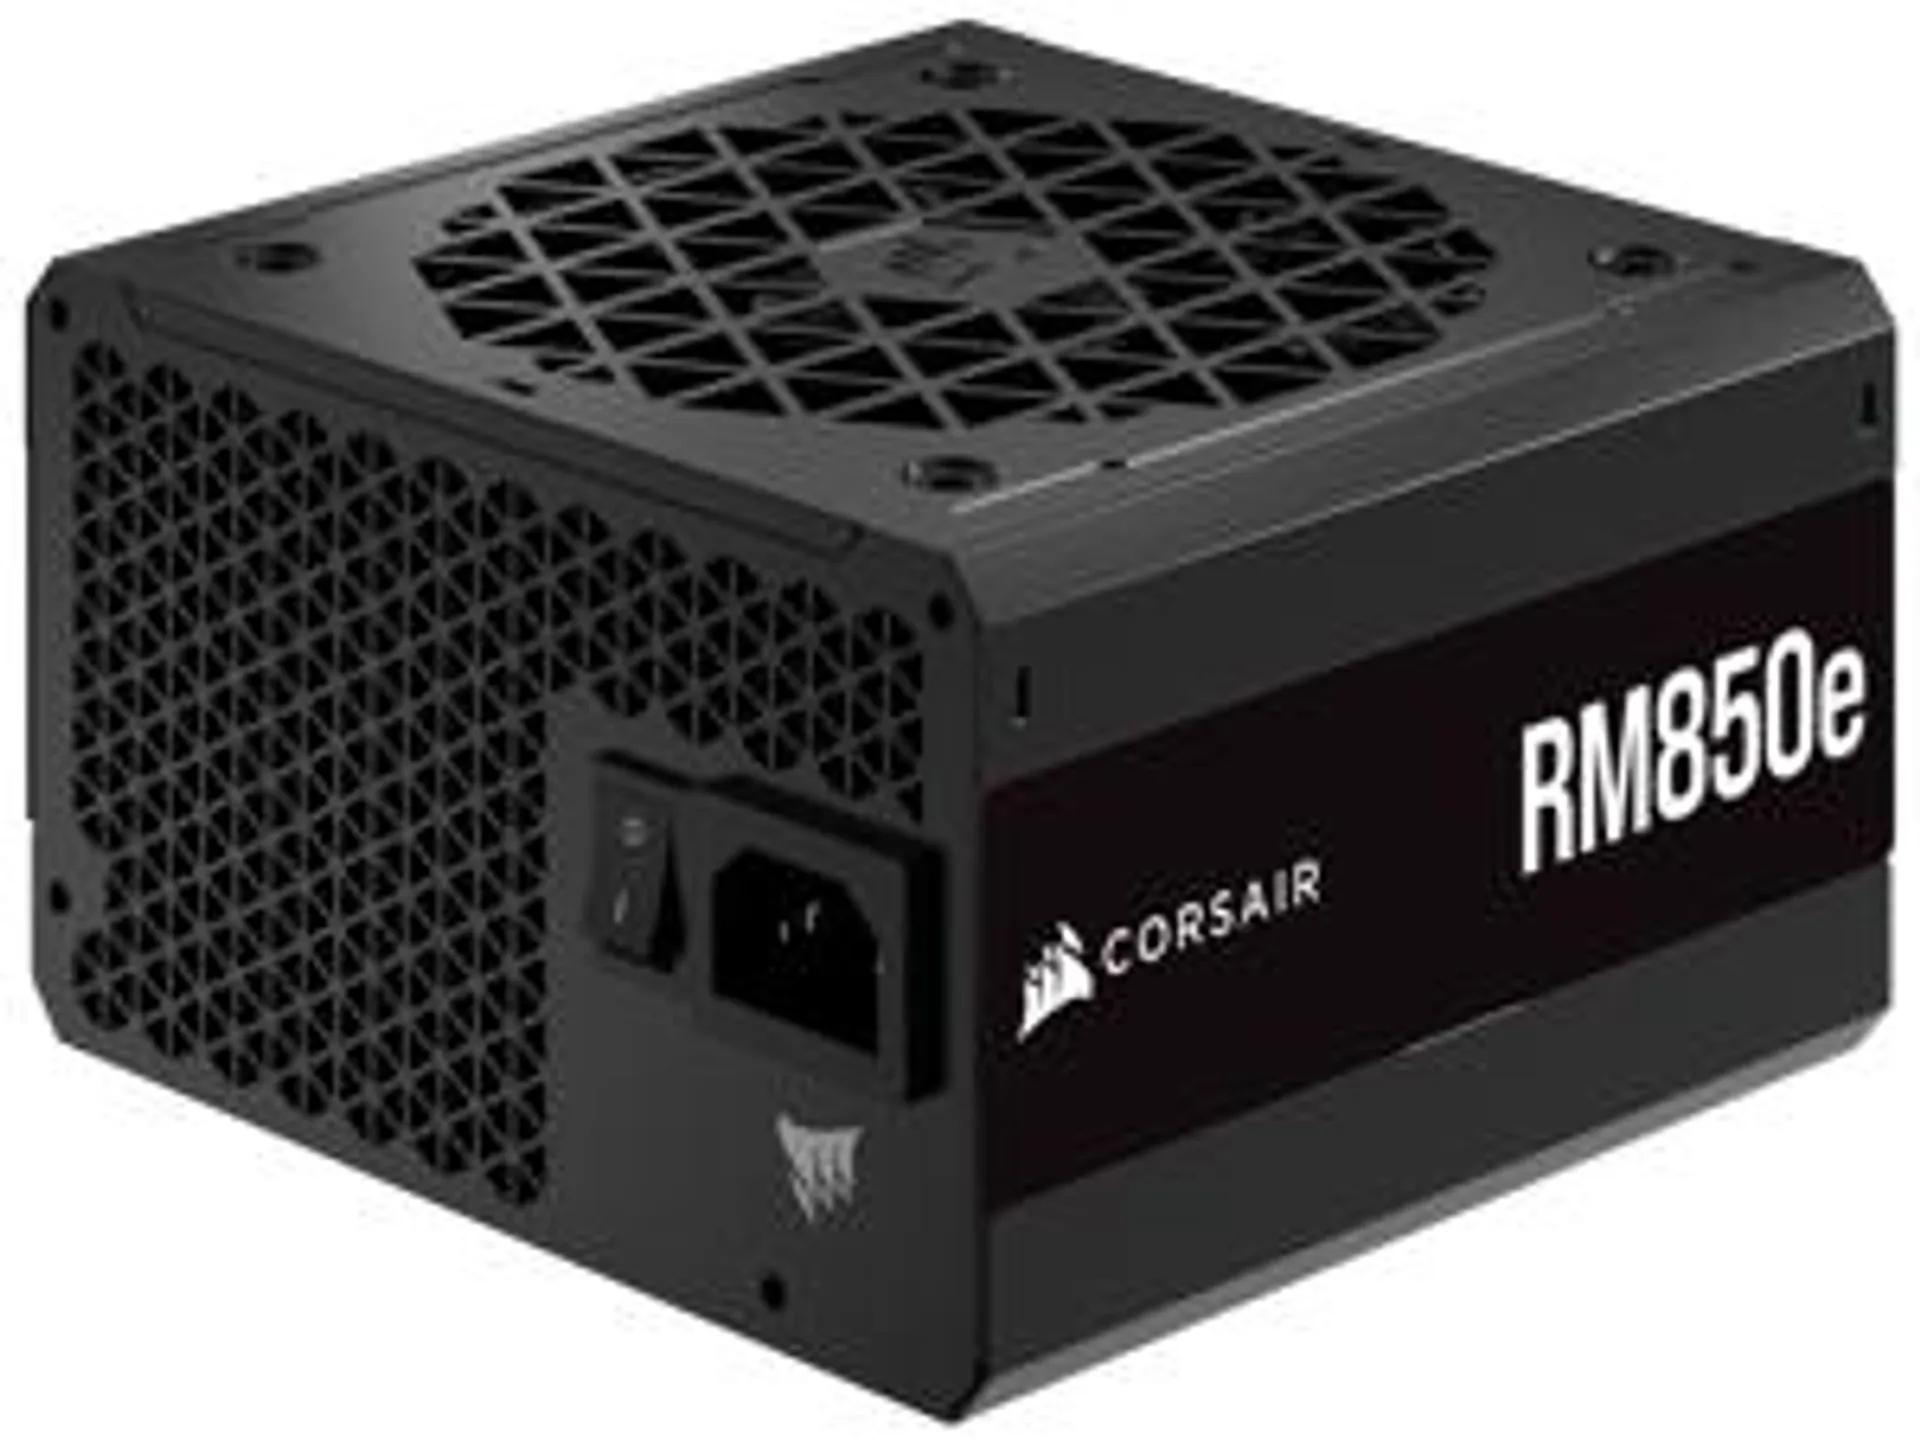 CORSAIR RM850e Fully Modular Low-Noise ATX Power Supply - ATX 3.0 & PCIe 5.0 Compliant - 105°C-Rated Capacitors - 80 PLUS Gold Efficiency - Modern Standby Support